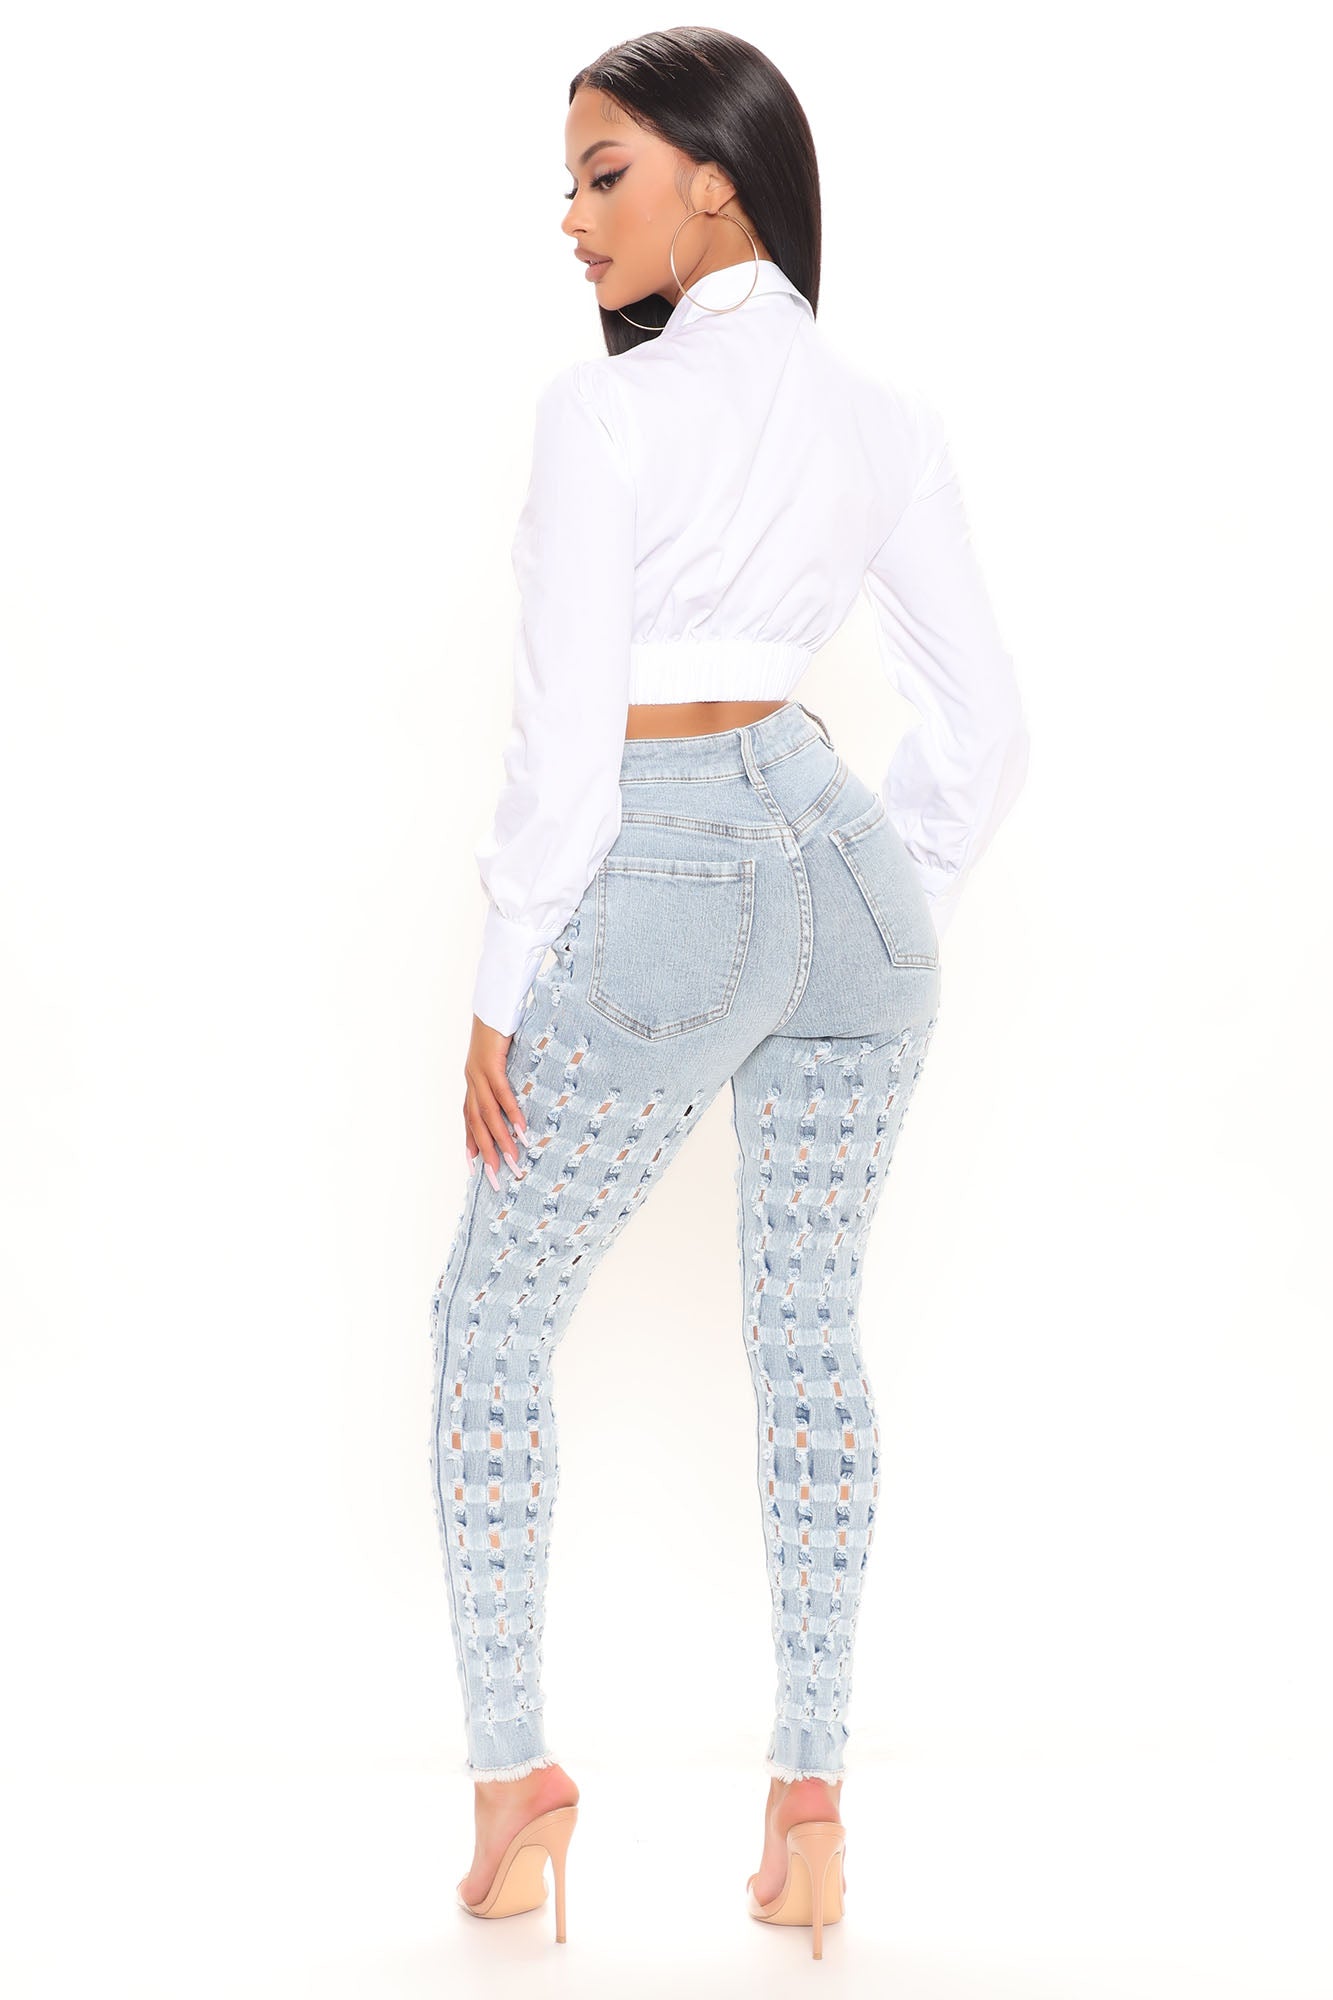 All The Feels Stretch Skinny Jeans - Light Blue Wash